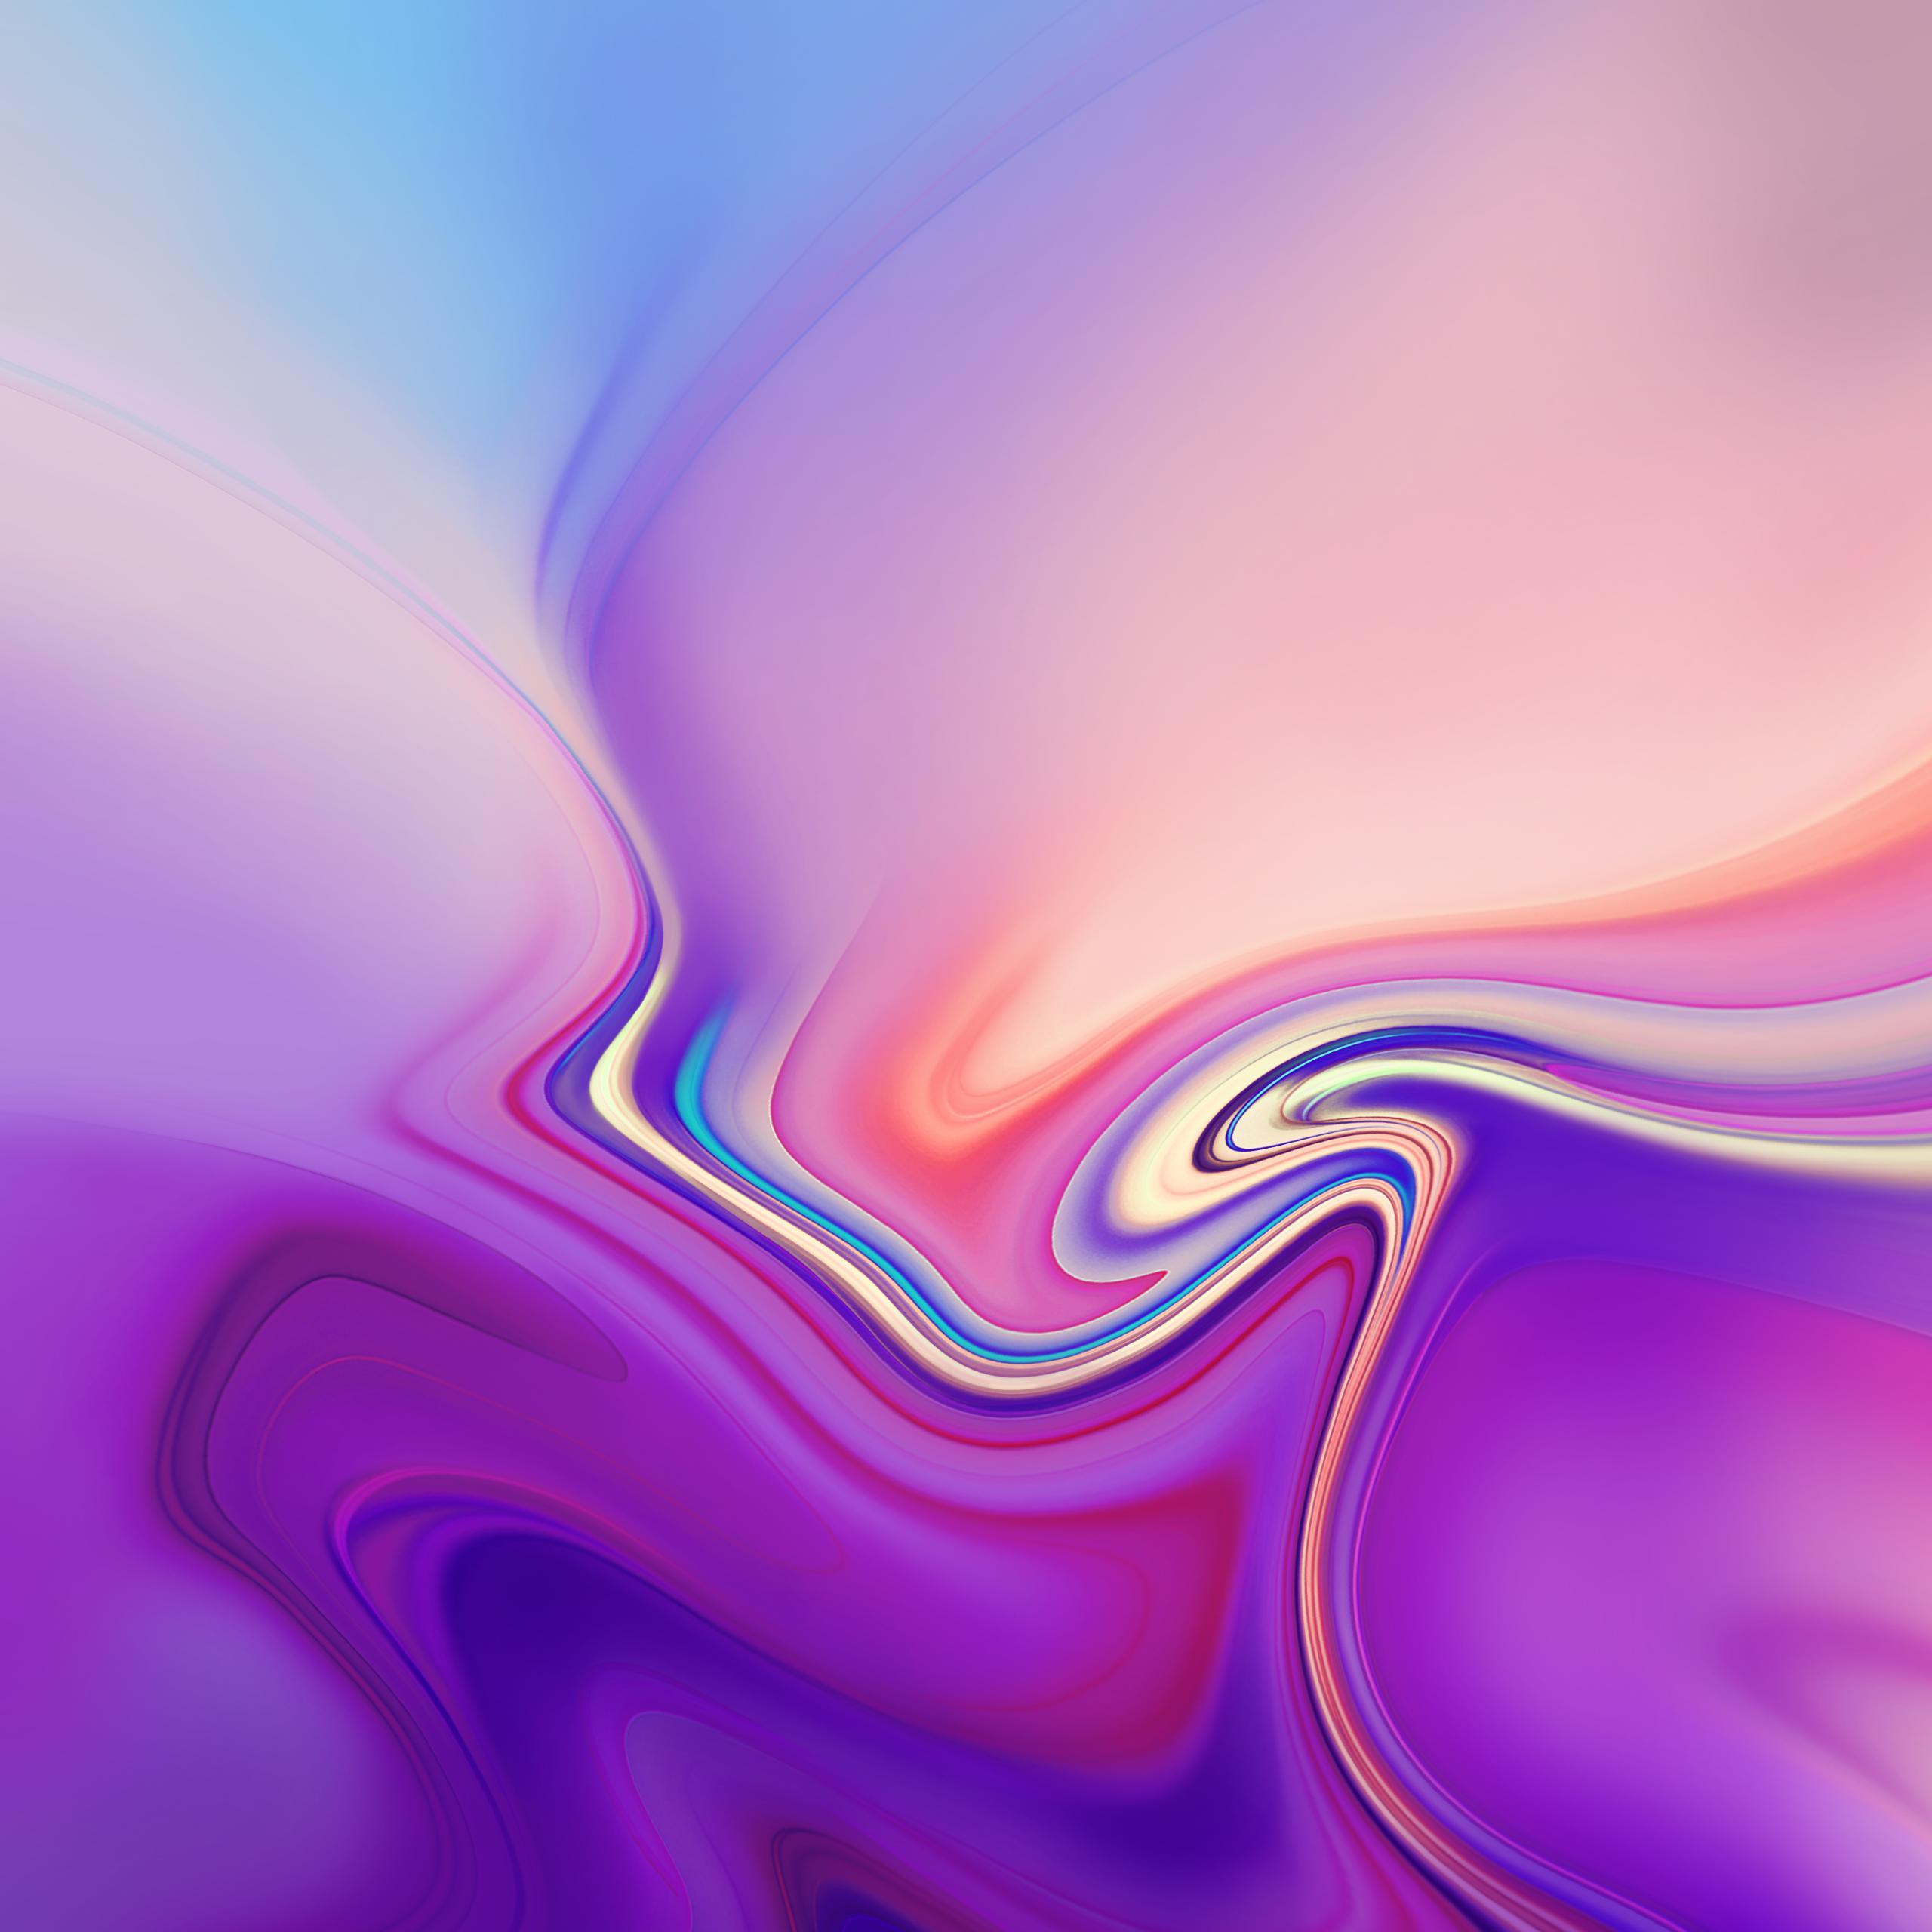 Download the official Galaxy Tab S4 wallpaper here